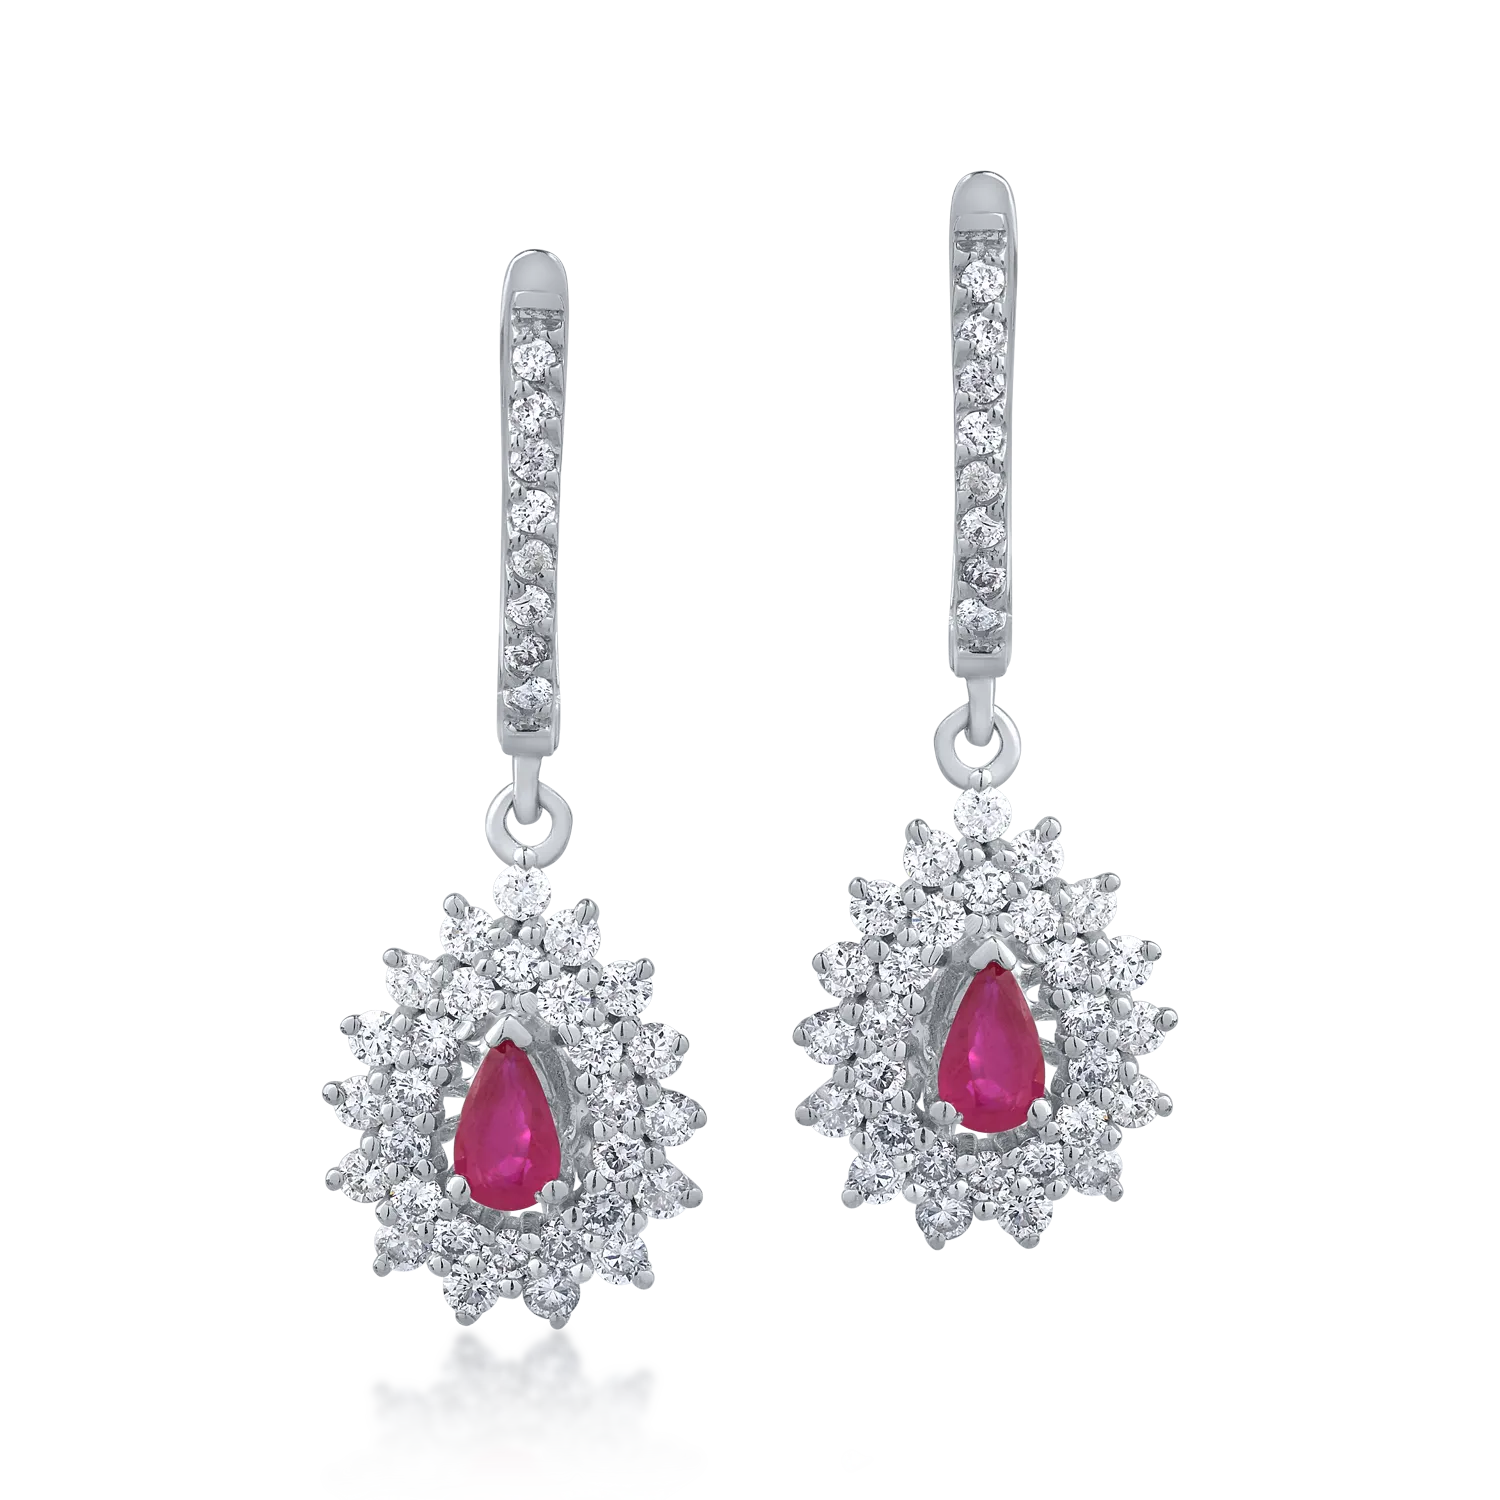 18K white gold earrings with 0.4ct rubies and 0.97ct diamonds